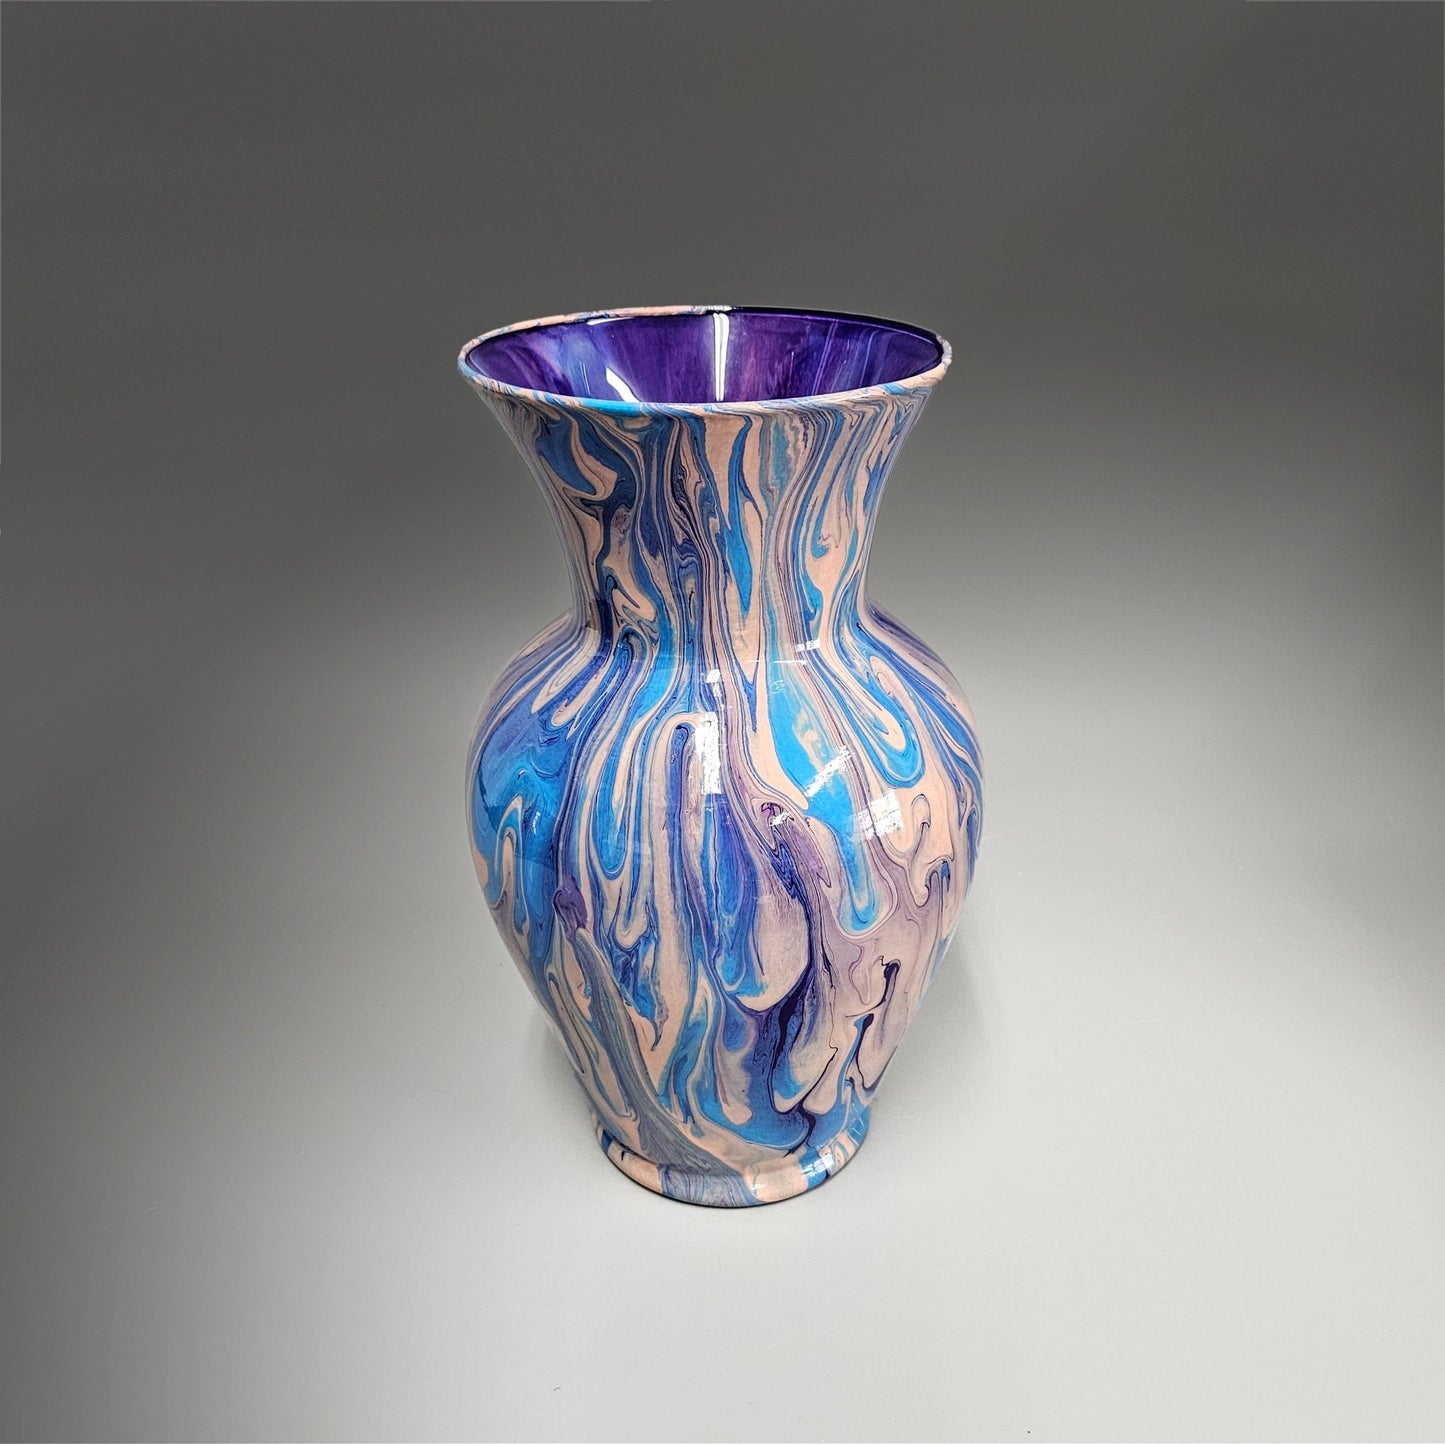 Glass Art Painted Vase in Blue, Purple and Pastel Peach | Gift Ideas